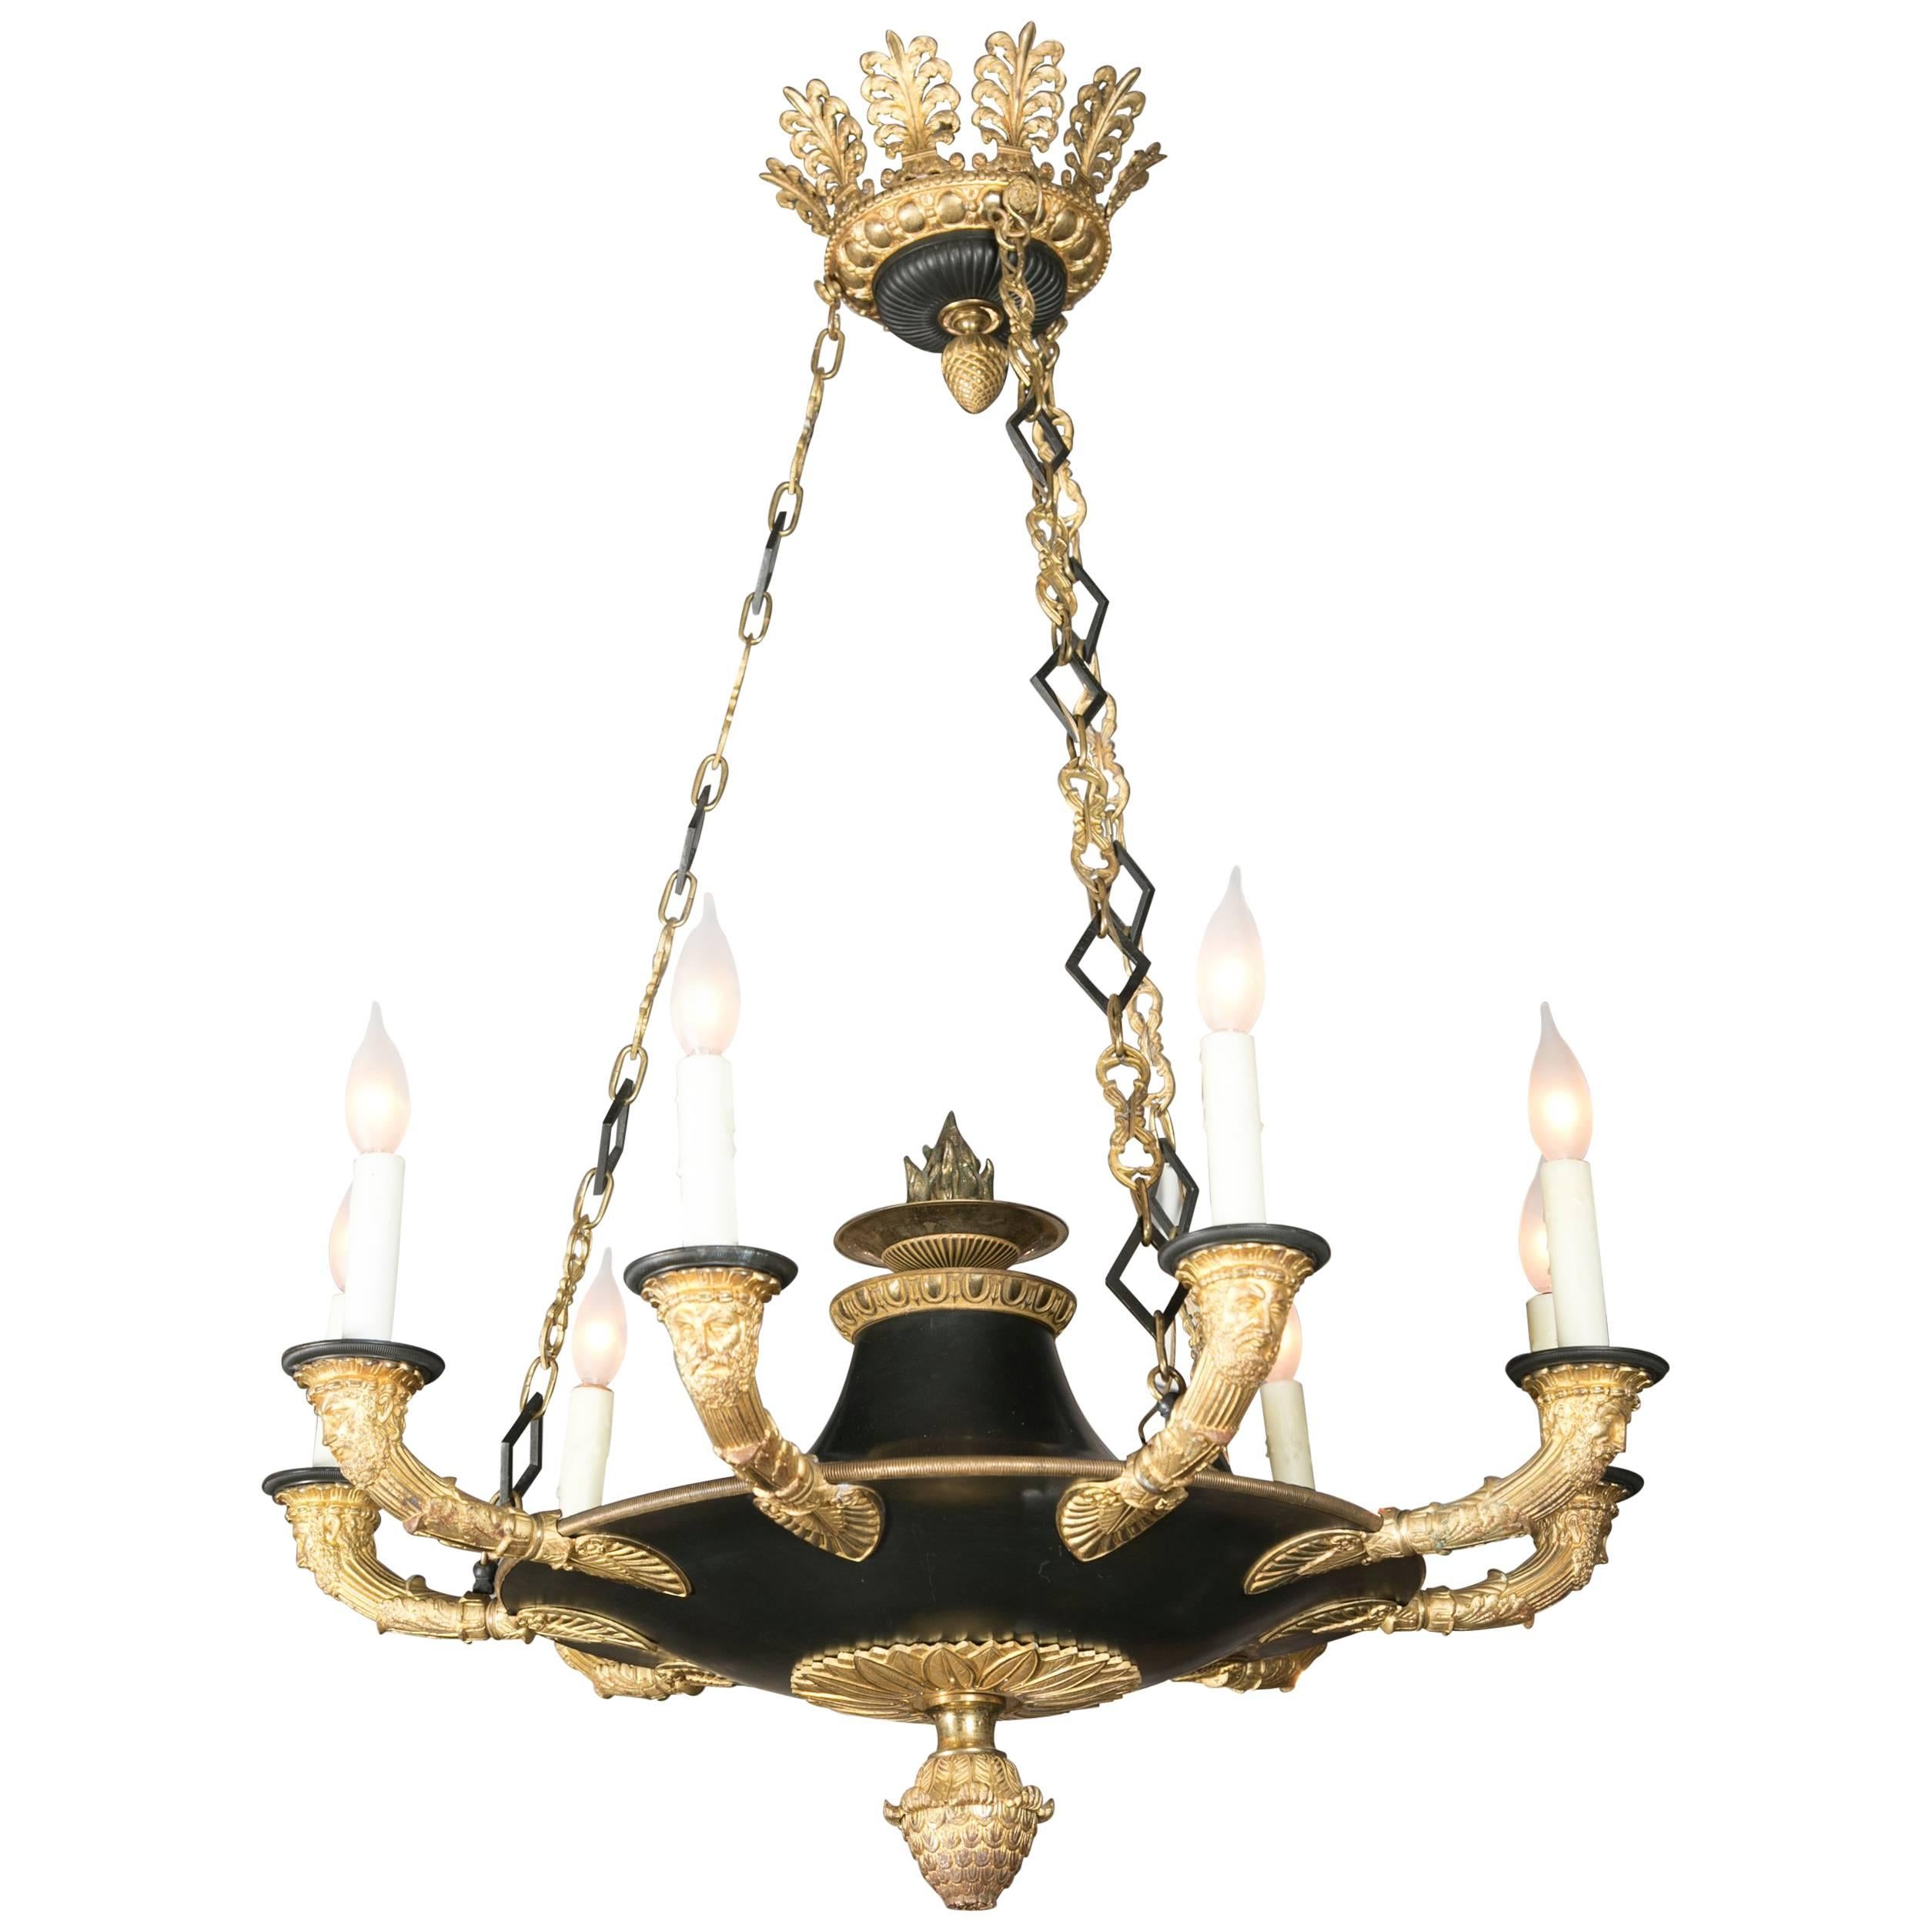 French D'ore Gilt and Patinated Bronze Nine-Light Chandelier For Sale